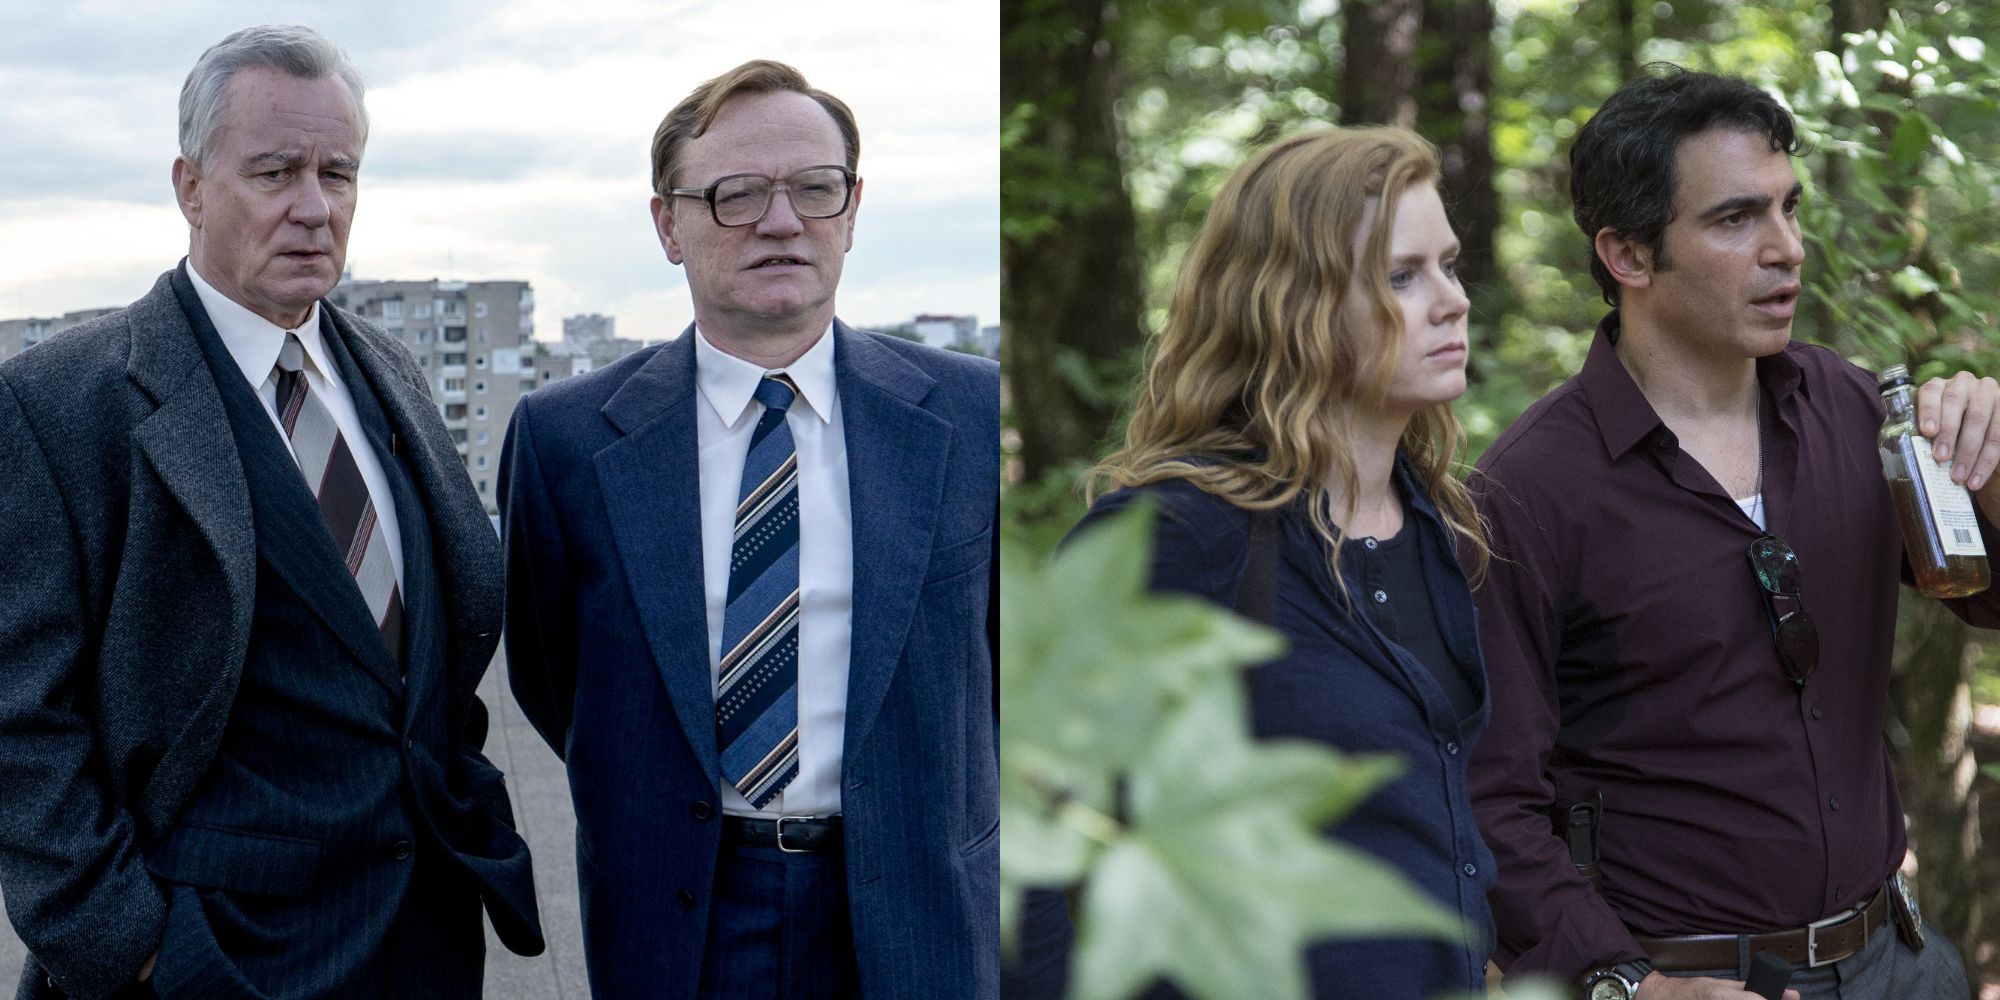 Boris and Valery in Chernobyl and Camille and Richard in Sharp Objects.